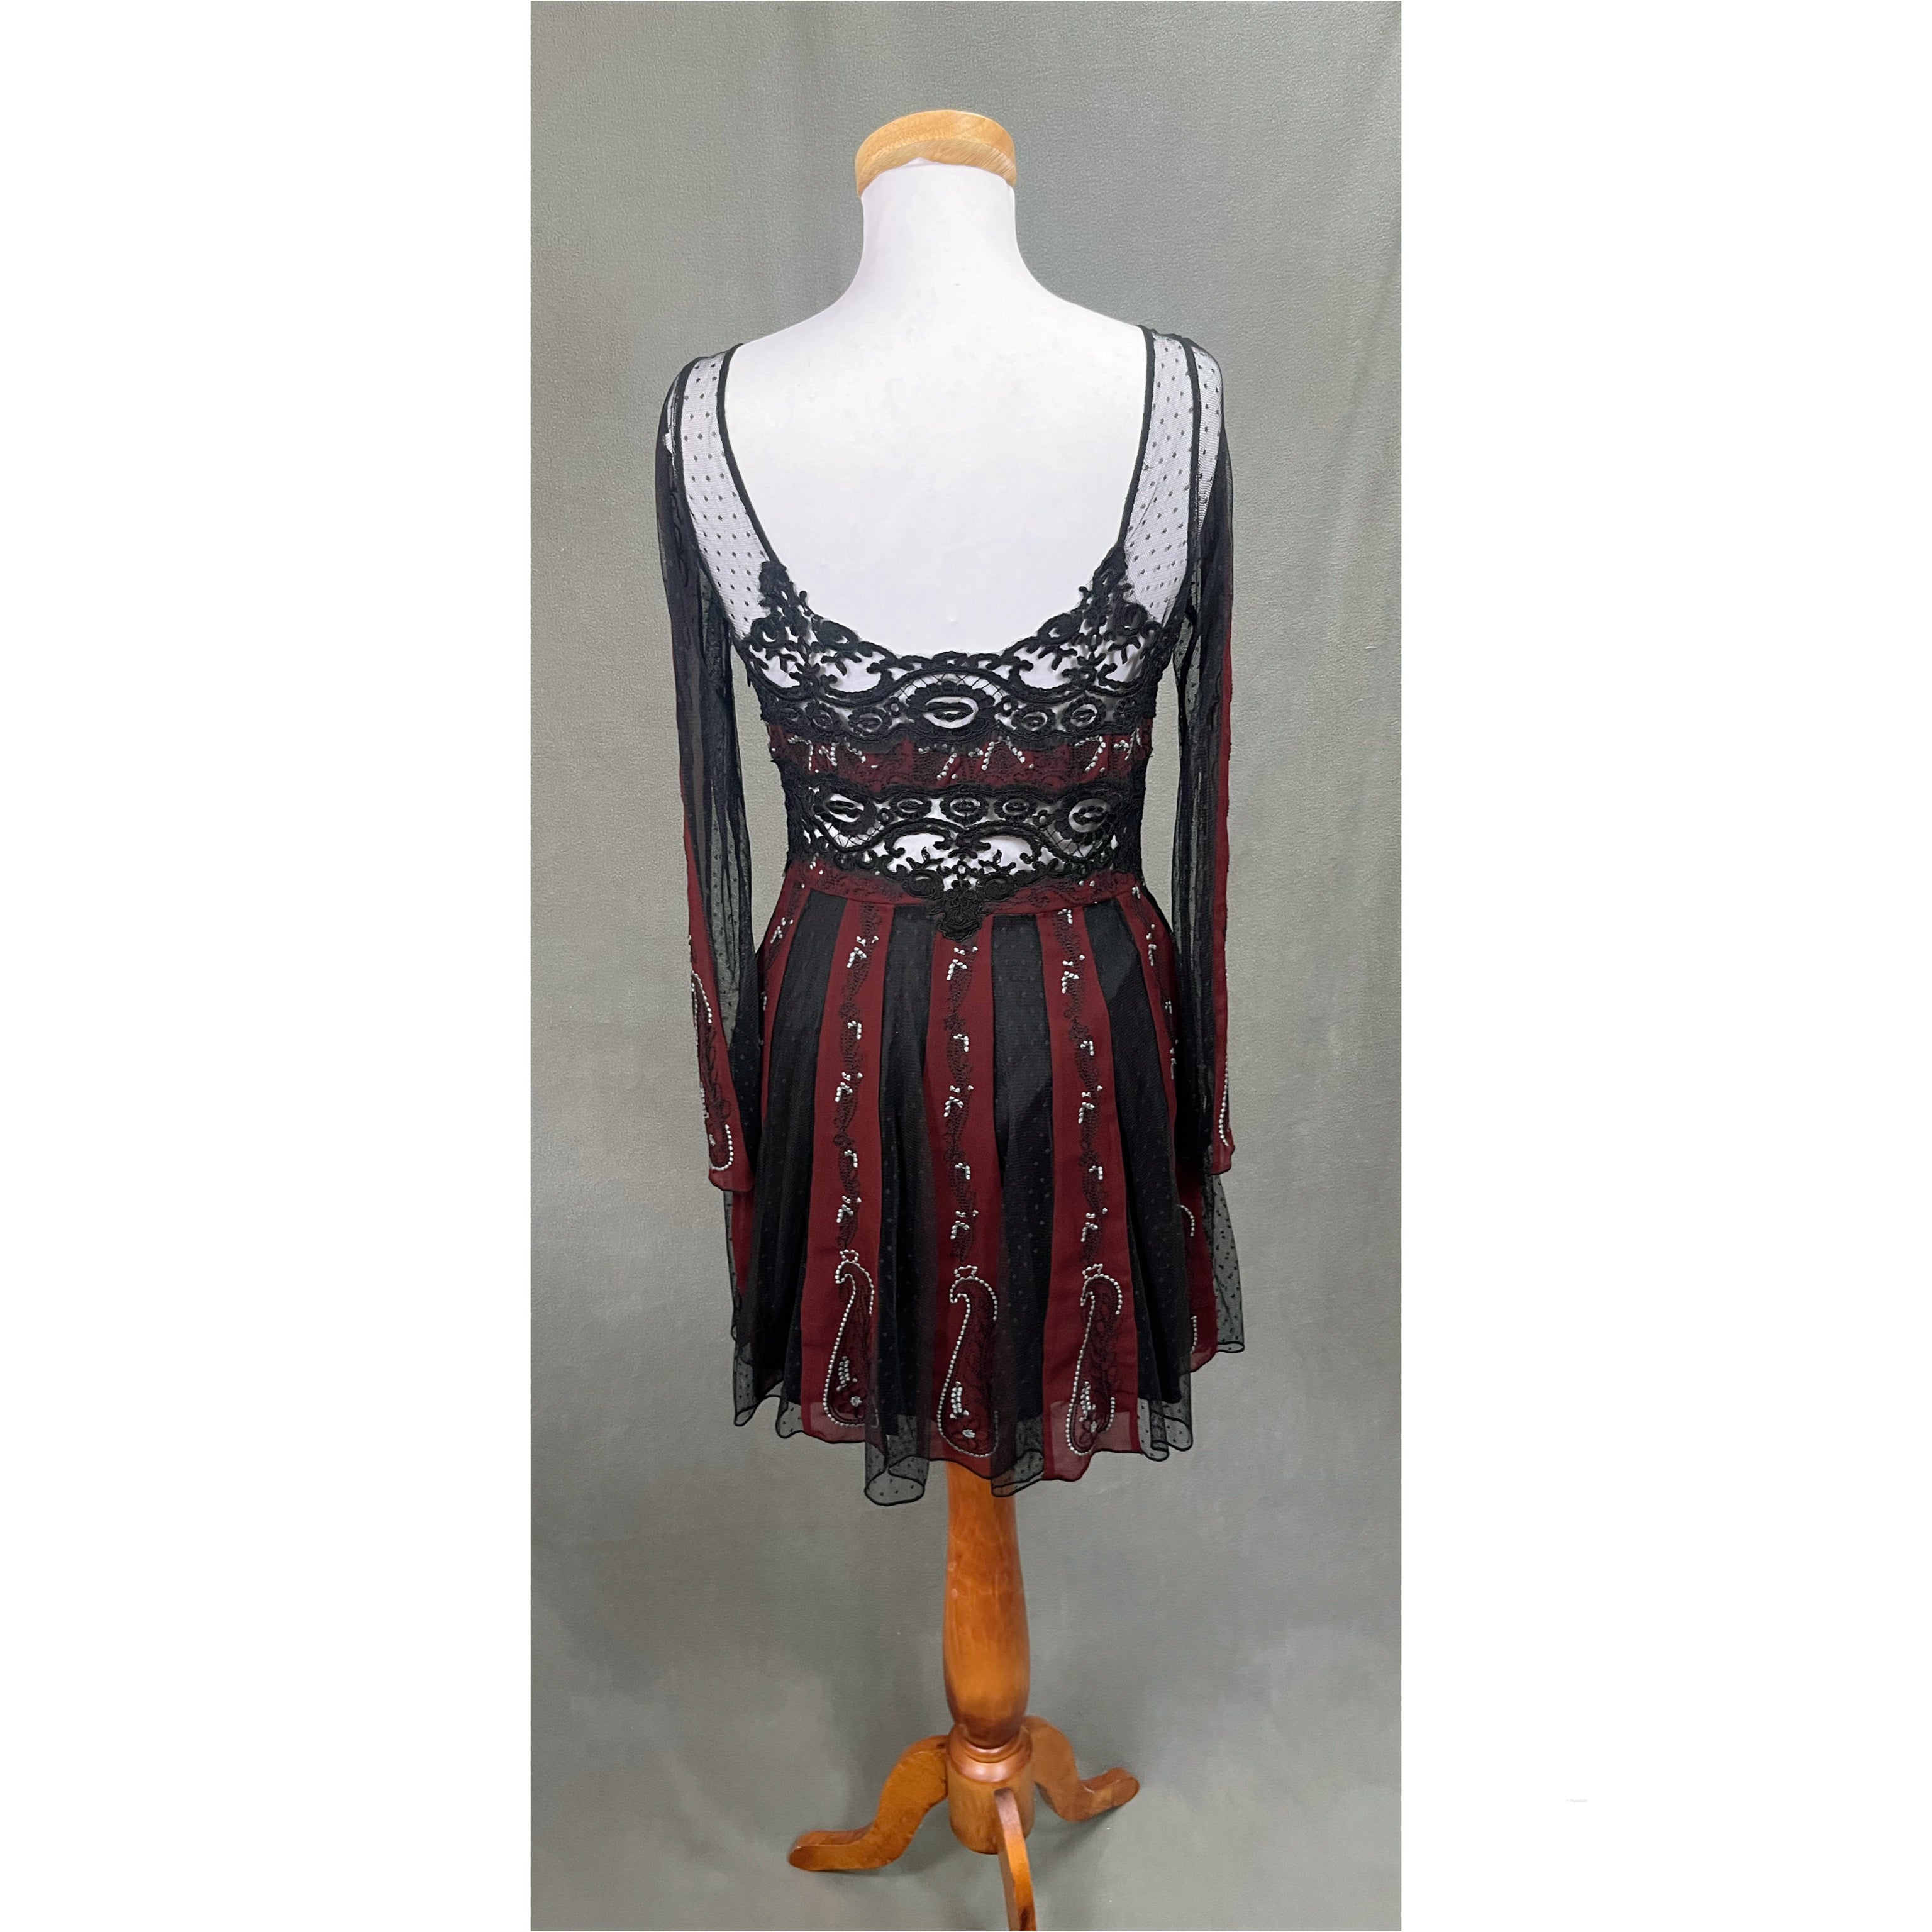 Free People black and wine dress, size 4